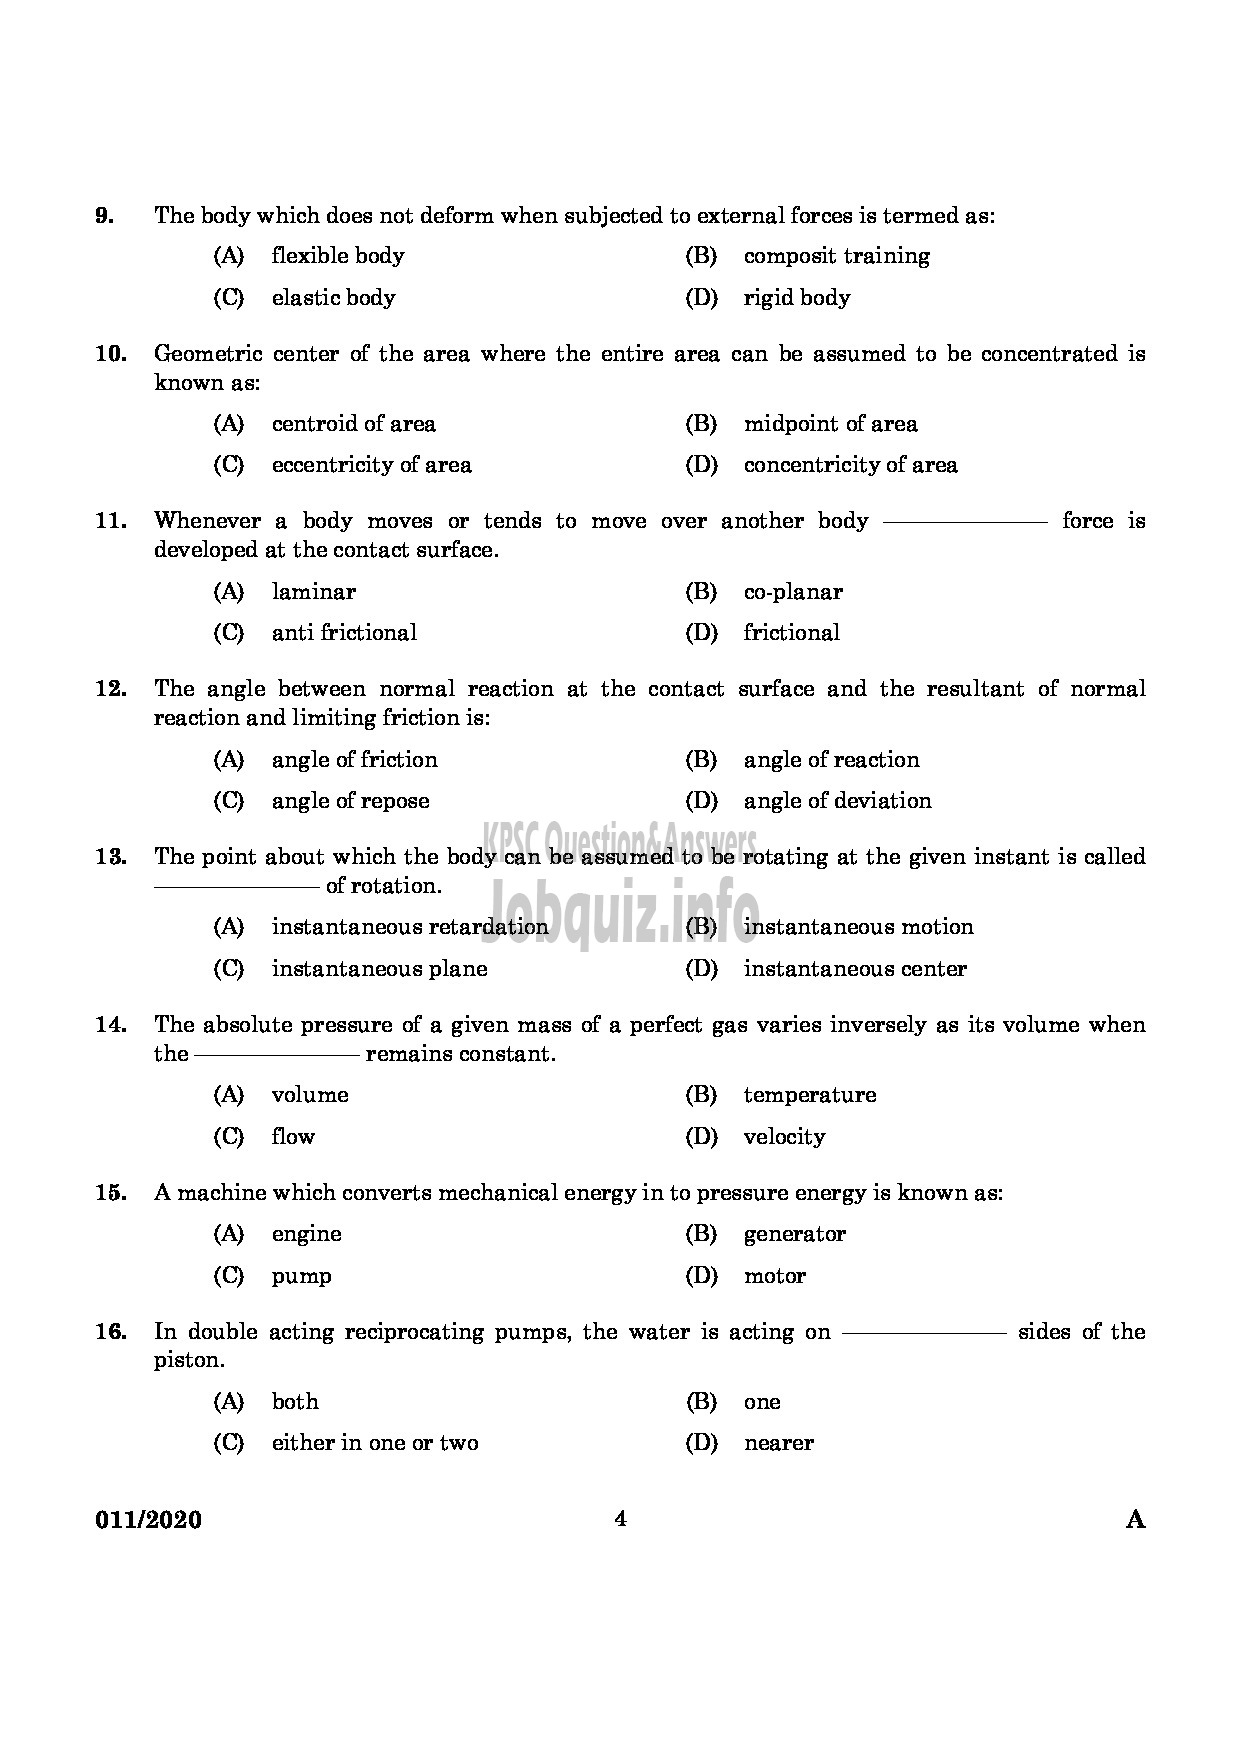 Kerala PSC Question Paper - Tracer Grade I Malabar Cements Limited-2